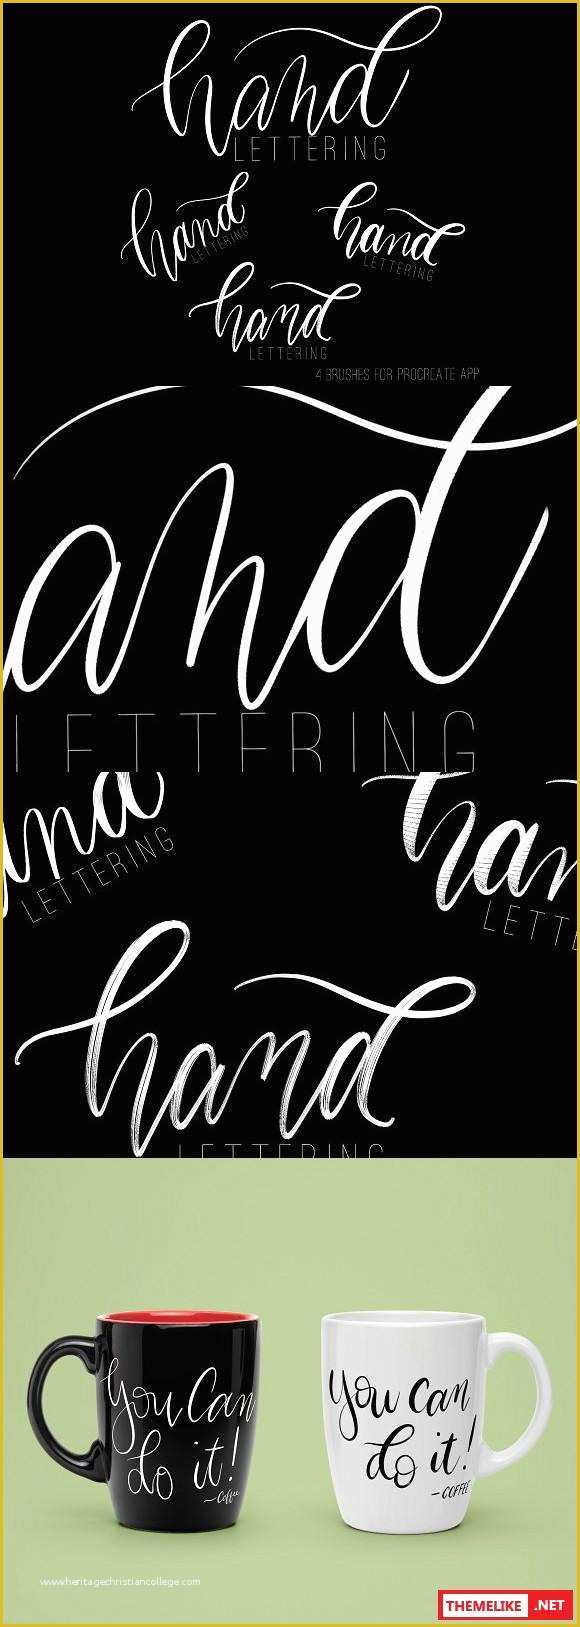 Free Procreate Templates Of Creativemarket Hand Lettering for Procreate App